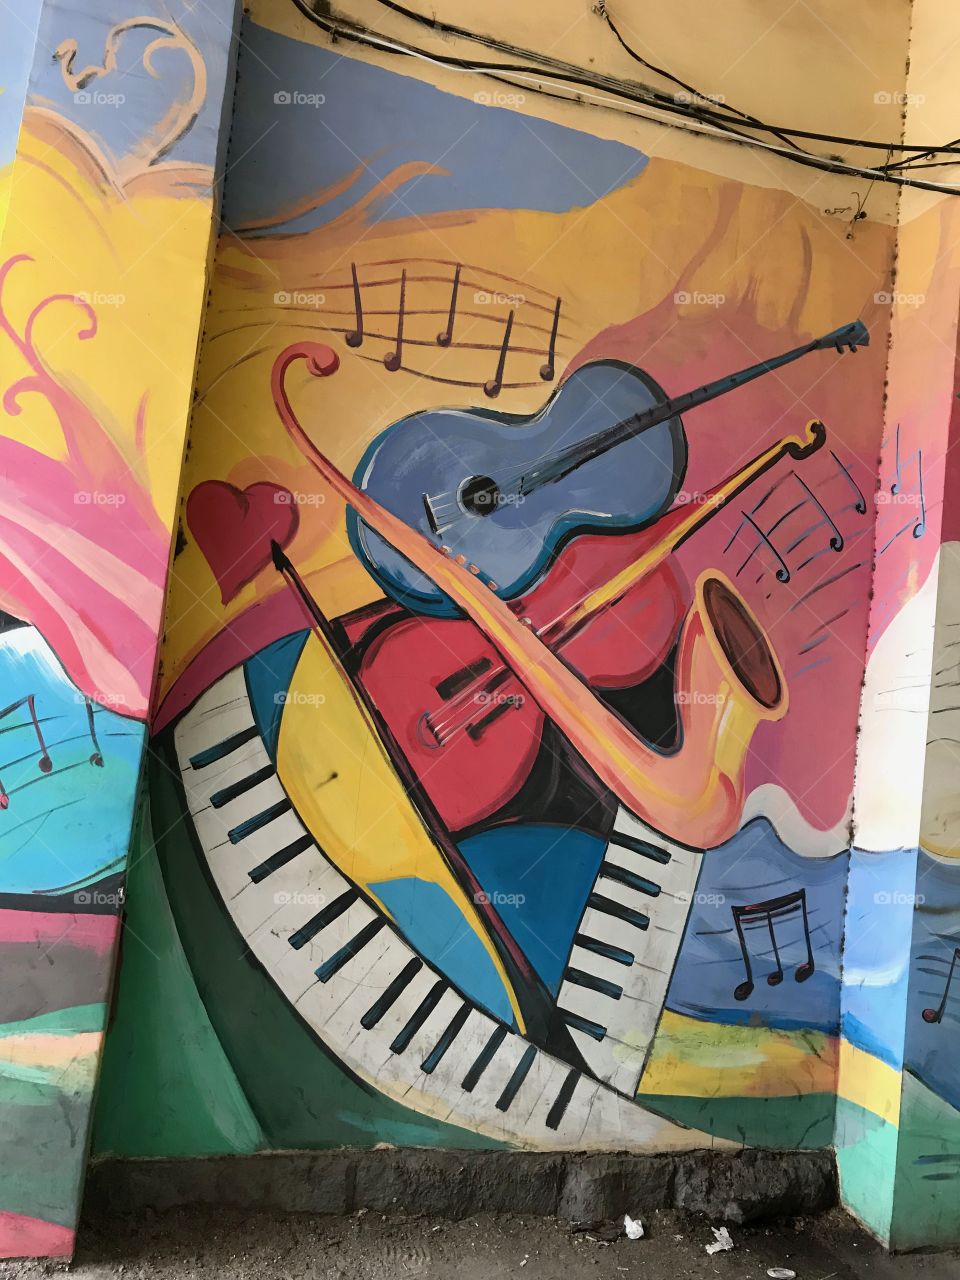 Graffiti with musical instruments